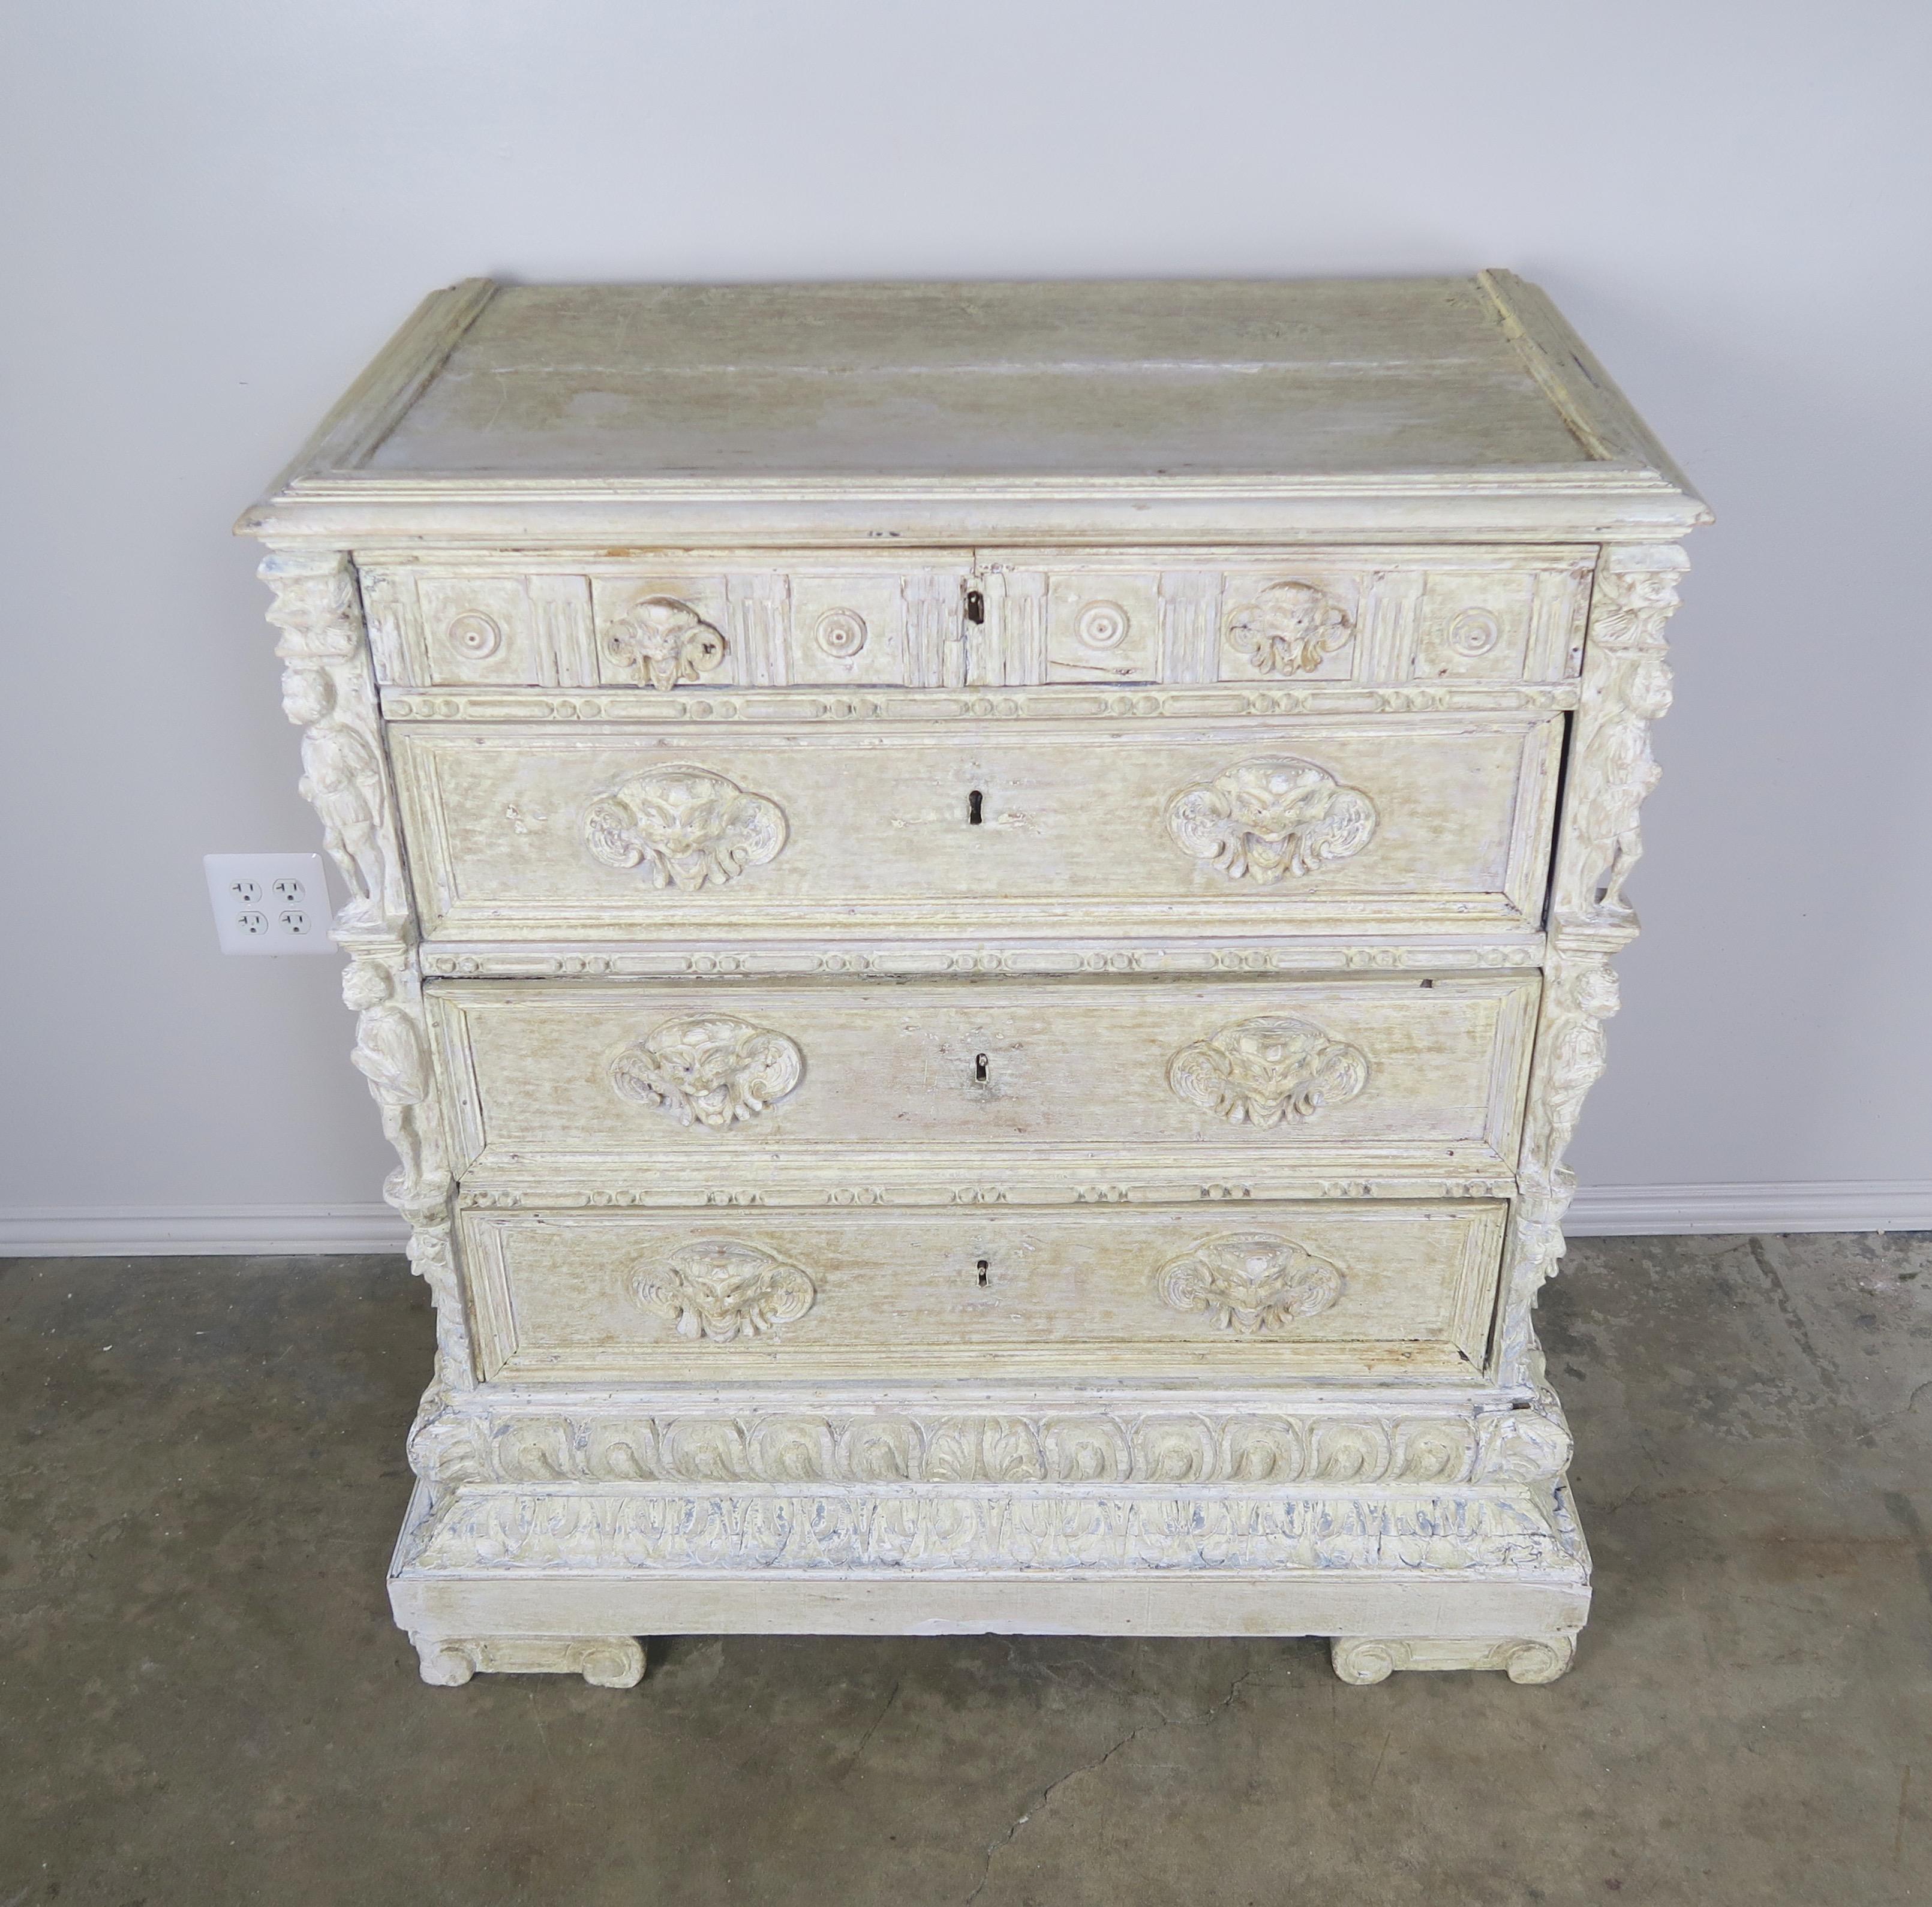 Early 19th century, possibly 18th century Italian carved chest with four drawers. The drawers are detailed with intricate hand carved face shaped pulls. The chest is beautifully worn with a white wash finish. The piece stands on four capital shaped